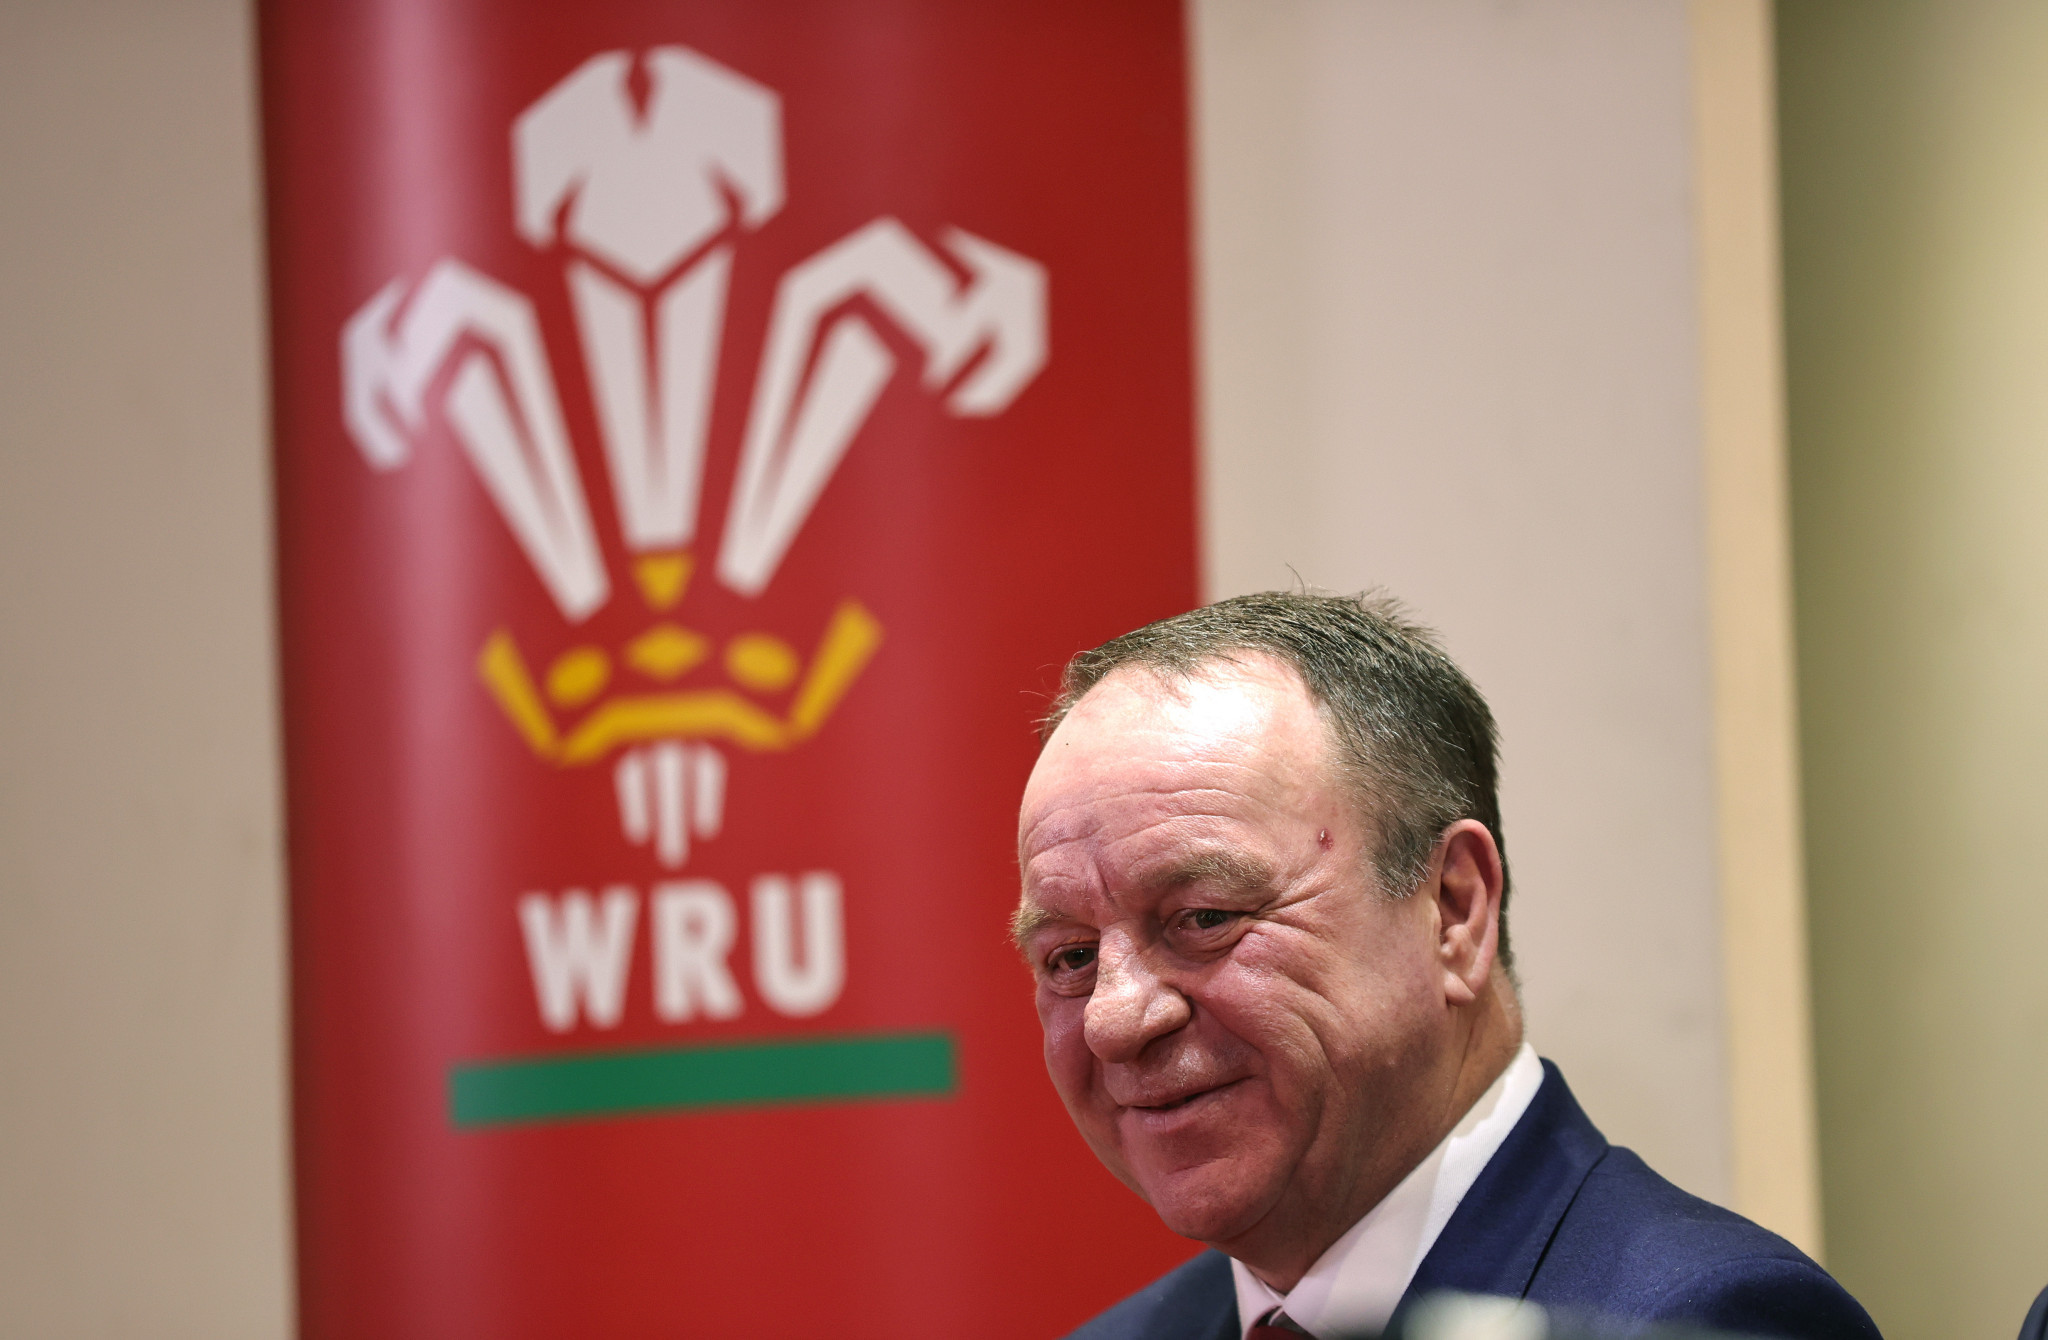 WRU chief executive Phillips steps down amid allegations with Walker filling gap